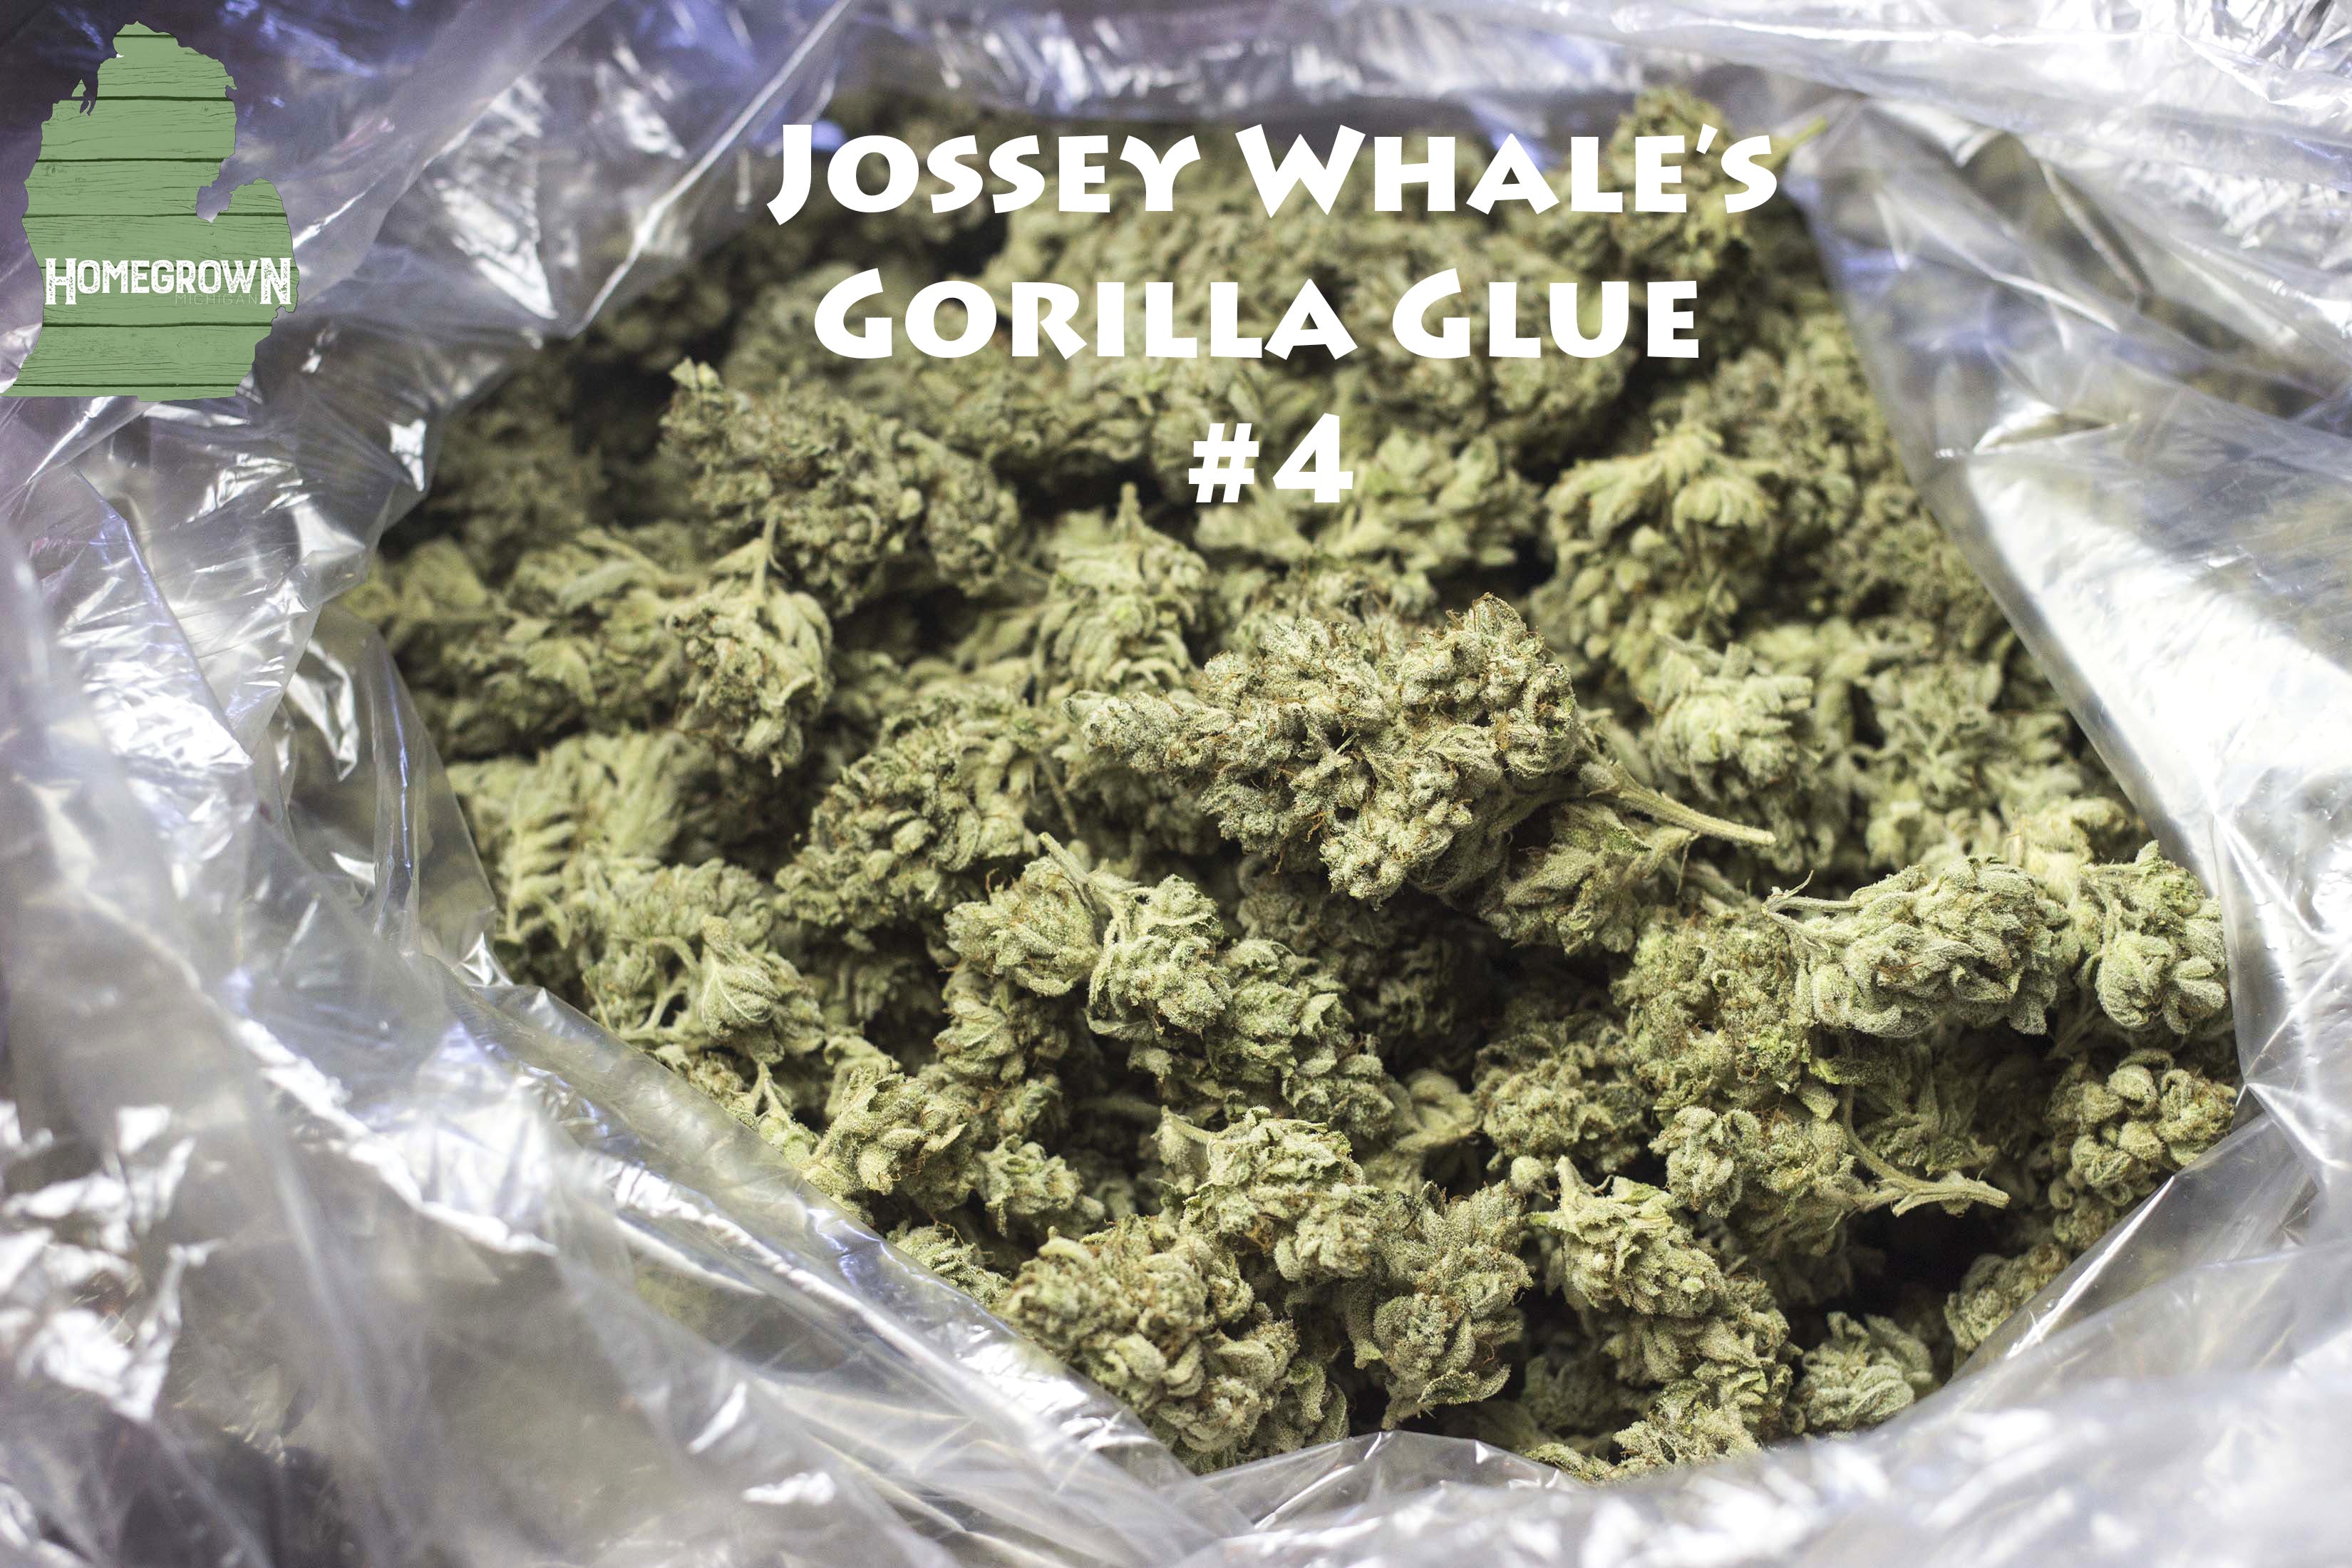 indica-jossey-whales-gg